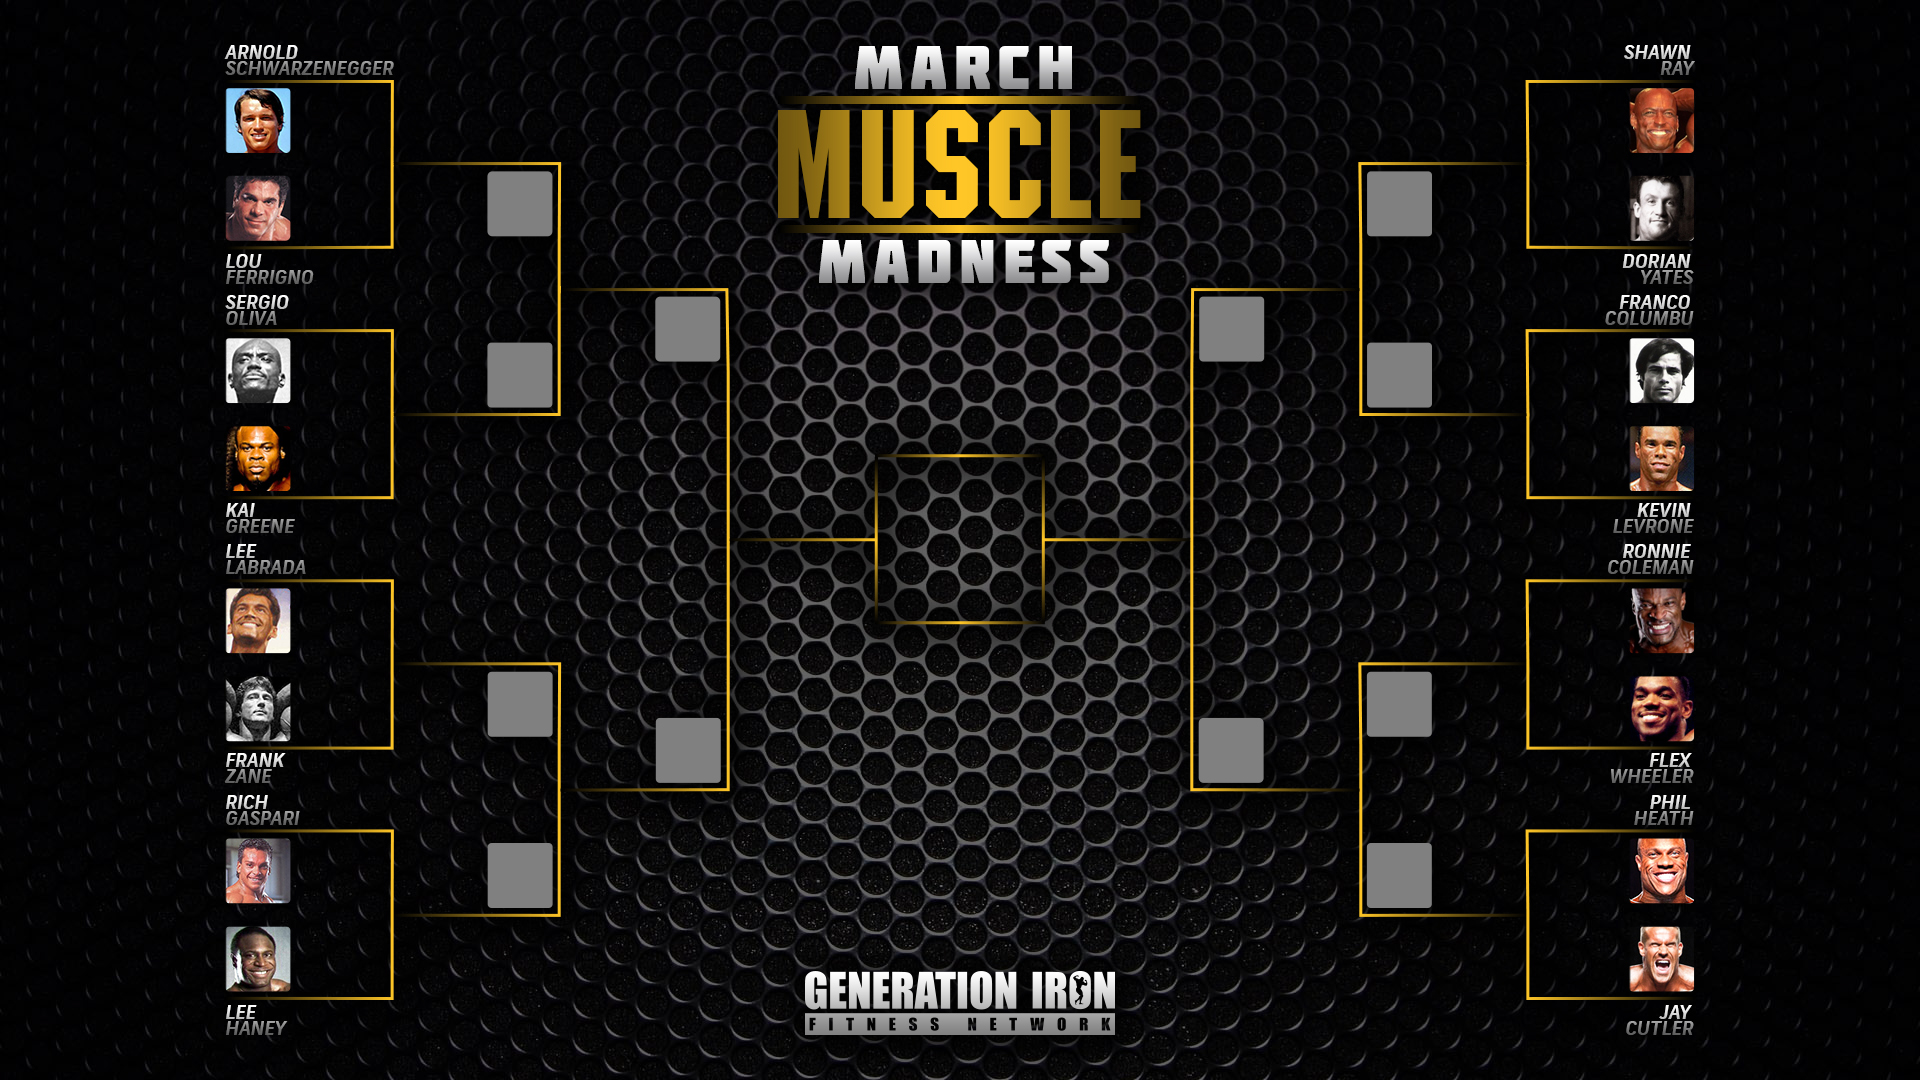 Generation Iron March Muscle Madness